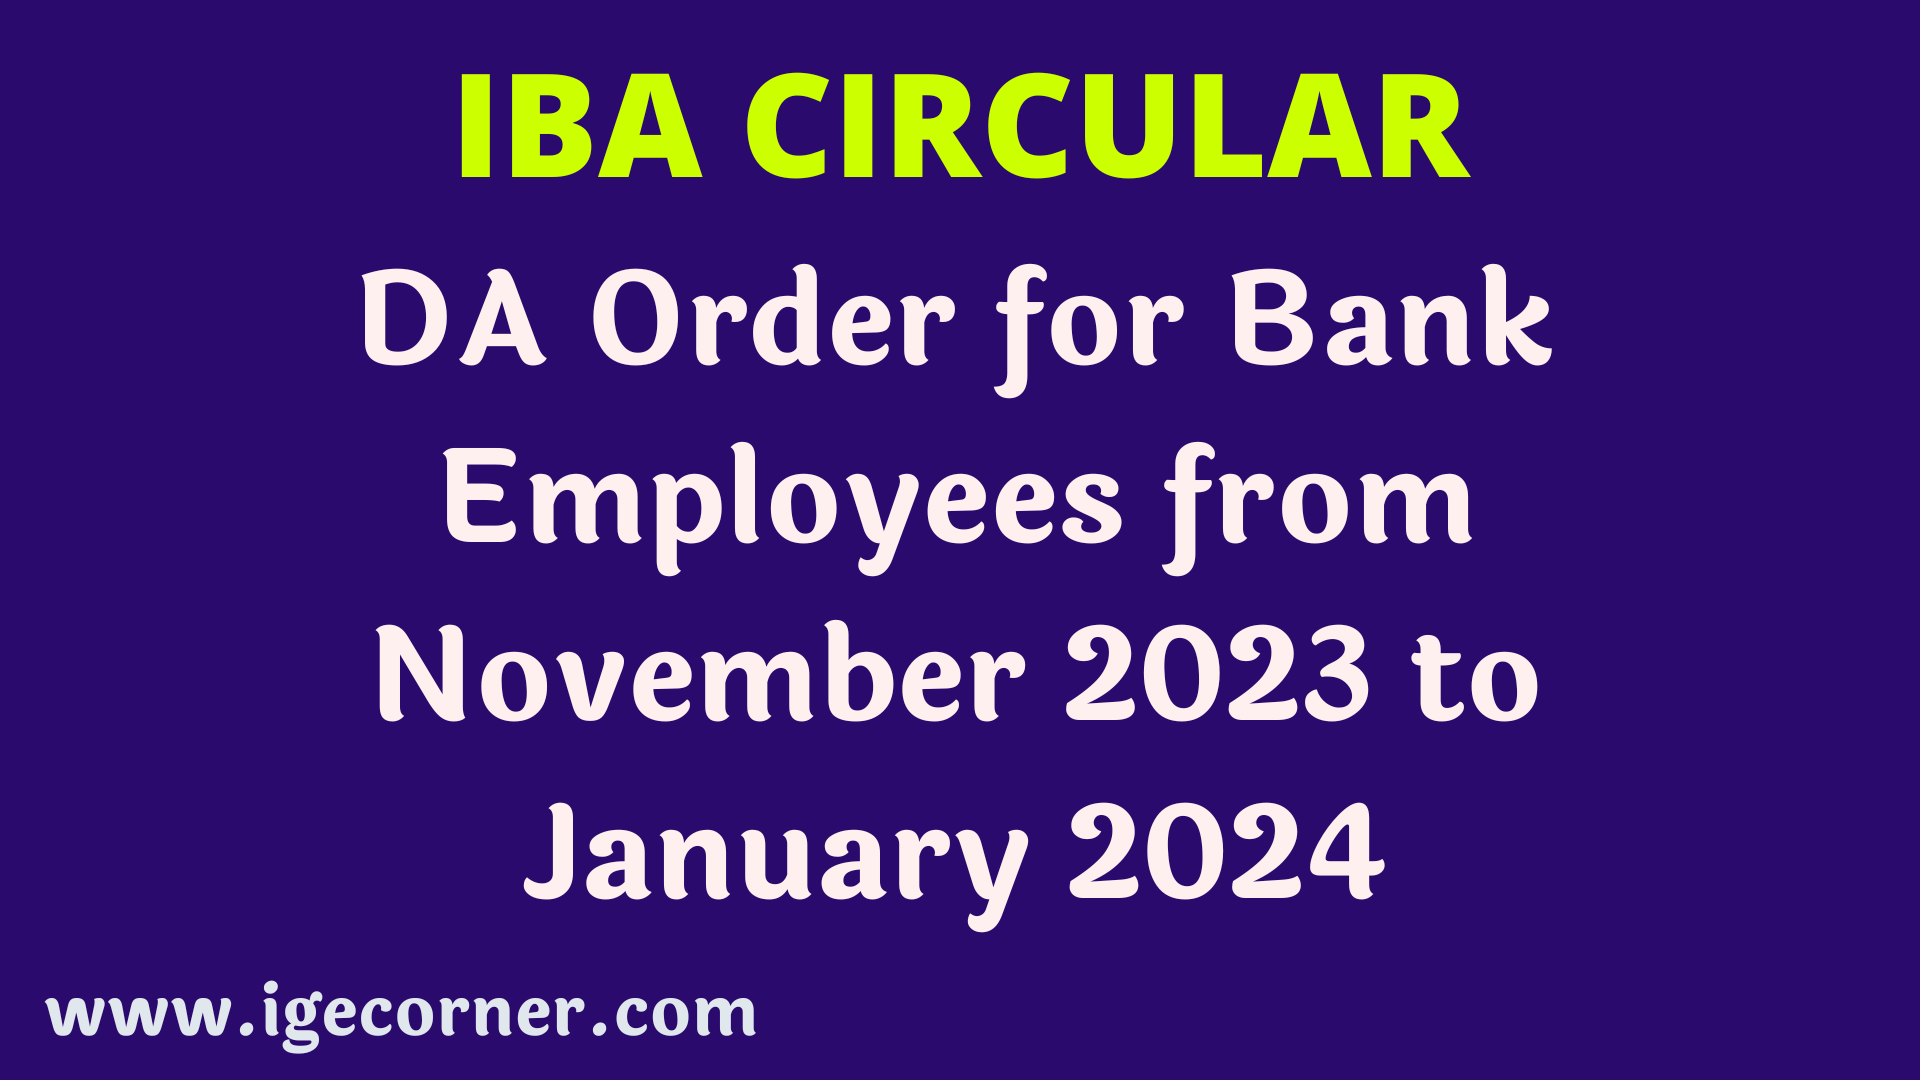 DA for Bank Employees from November 2023 to January 2024 IBA ORDER